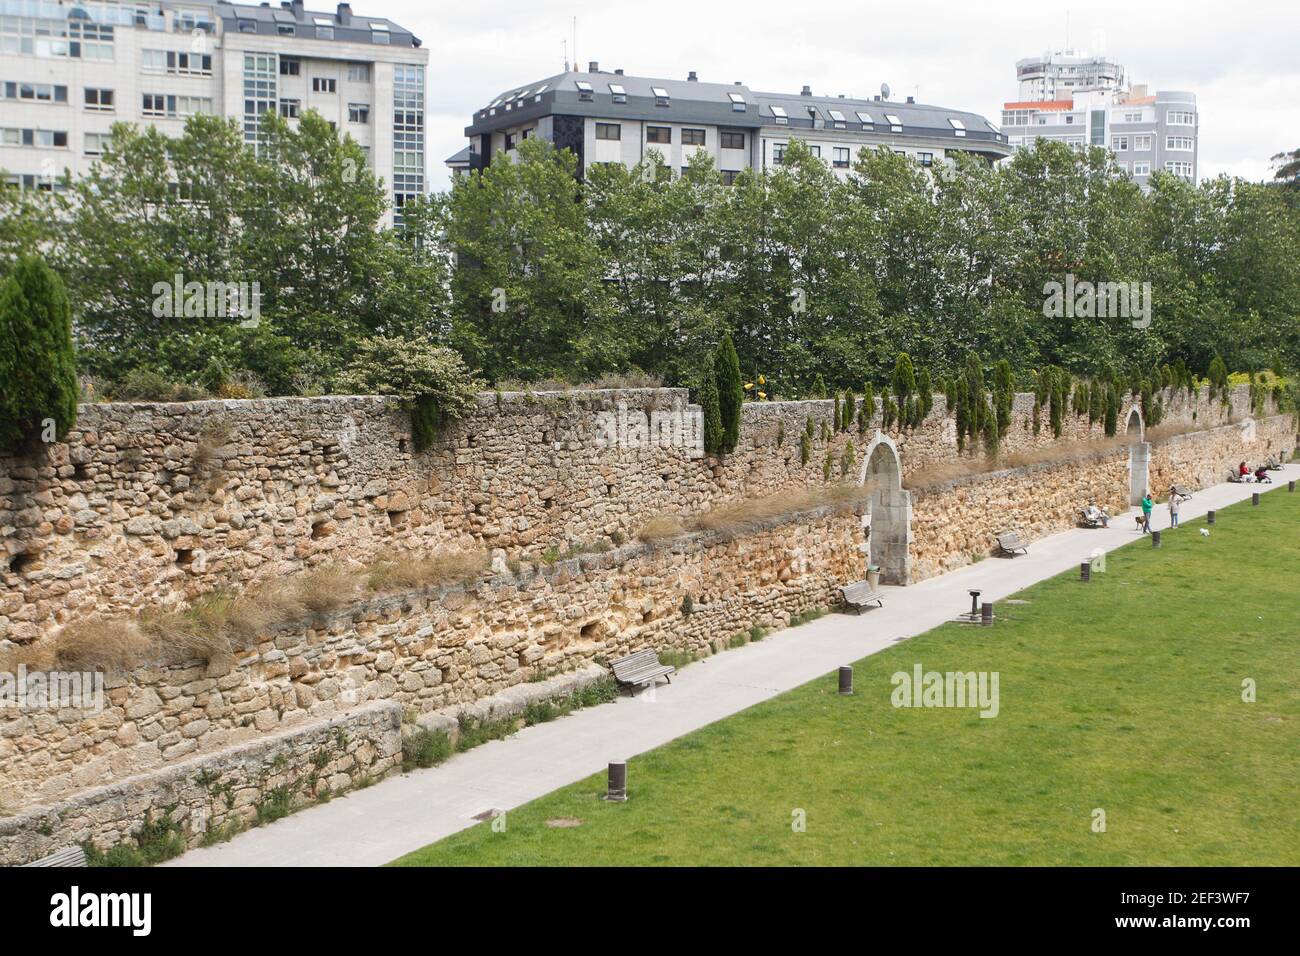 Old stone aqueduct that is part of the Walk of the bridges park in A Coruña, Spain Stock Photo